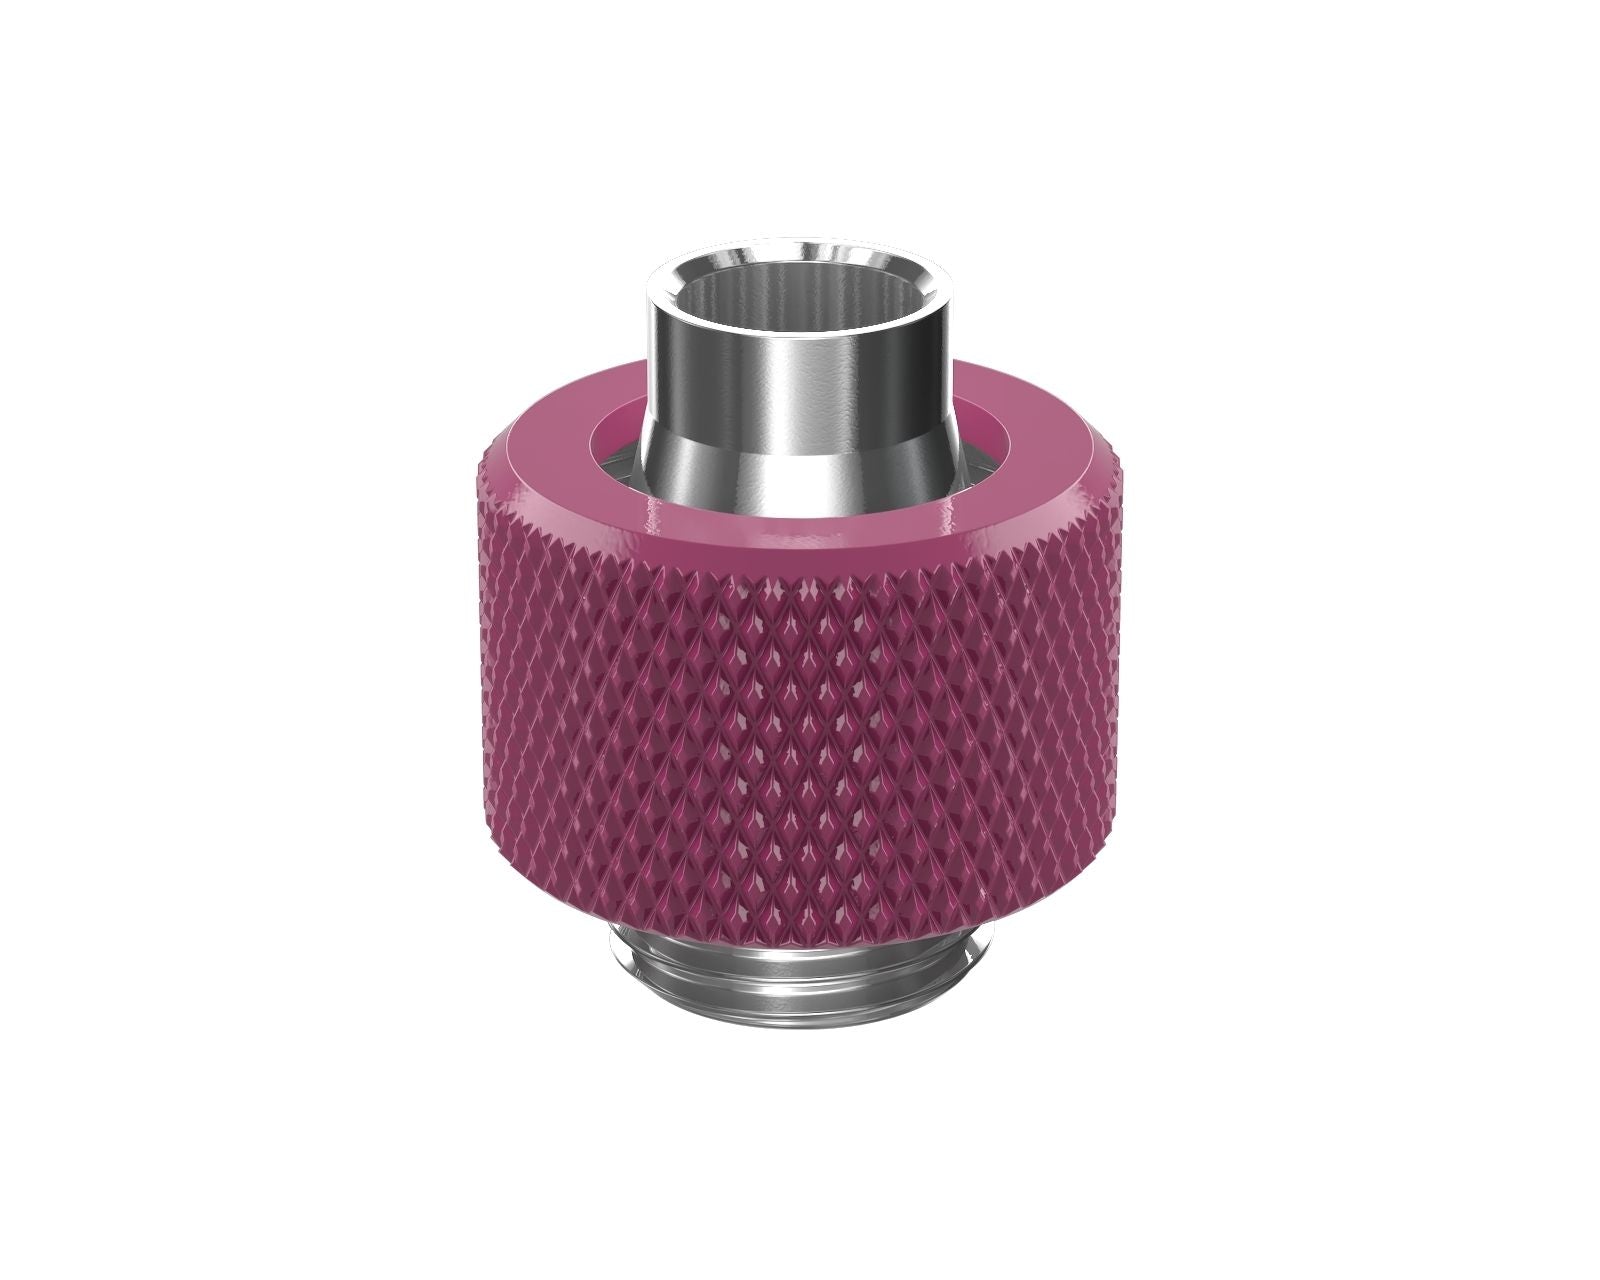 PrimoChill SecureFit SX - Premium Compression Fitting For 3/8in ID x 1/2in OD Flexible Tubing (F-SFSX12) - Available in 20+ Colors, Custom Watercooling Loop Ready - Magenta